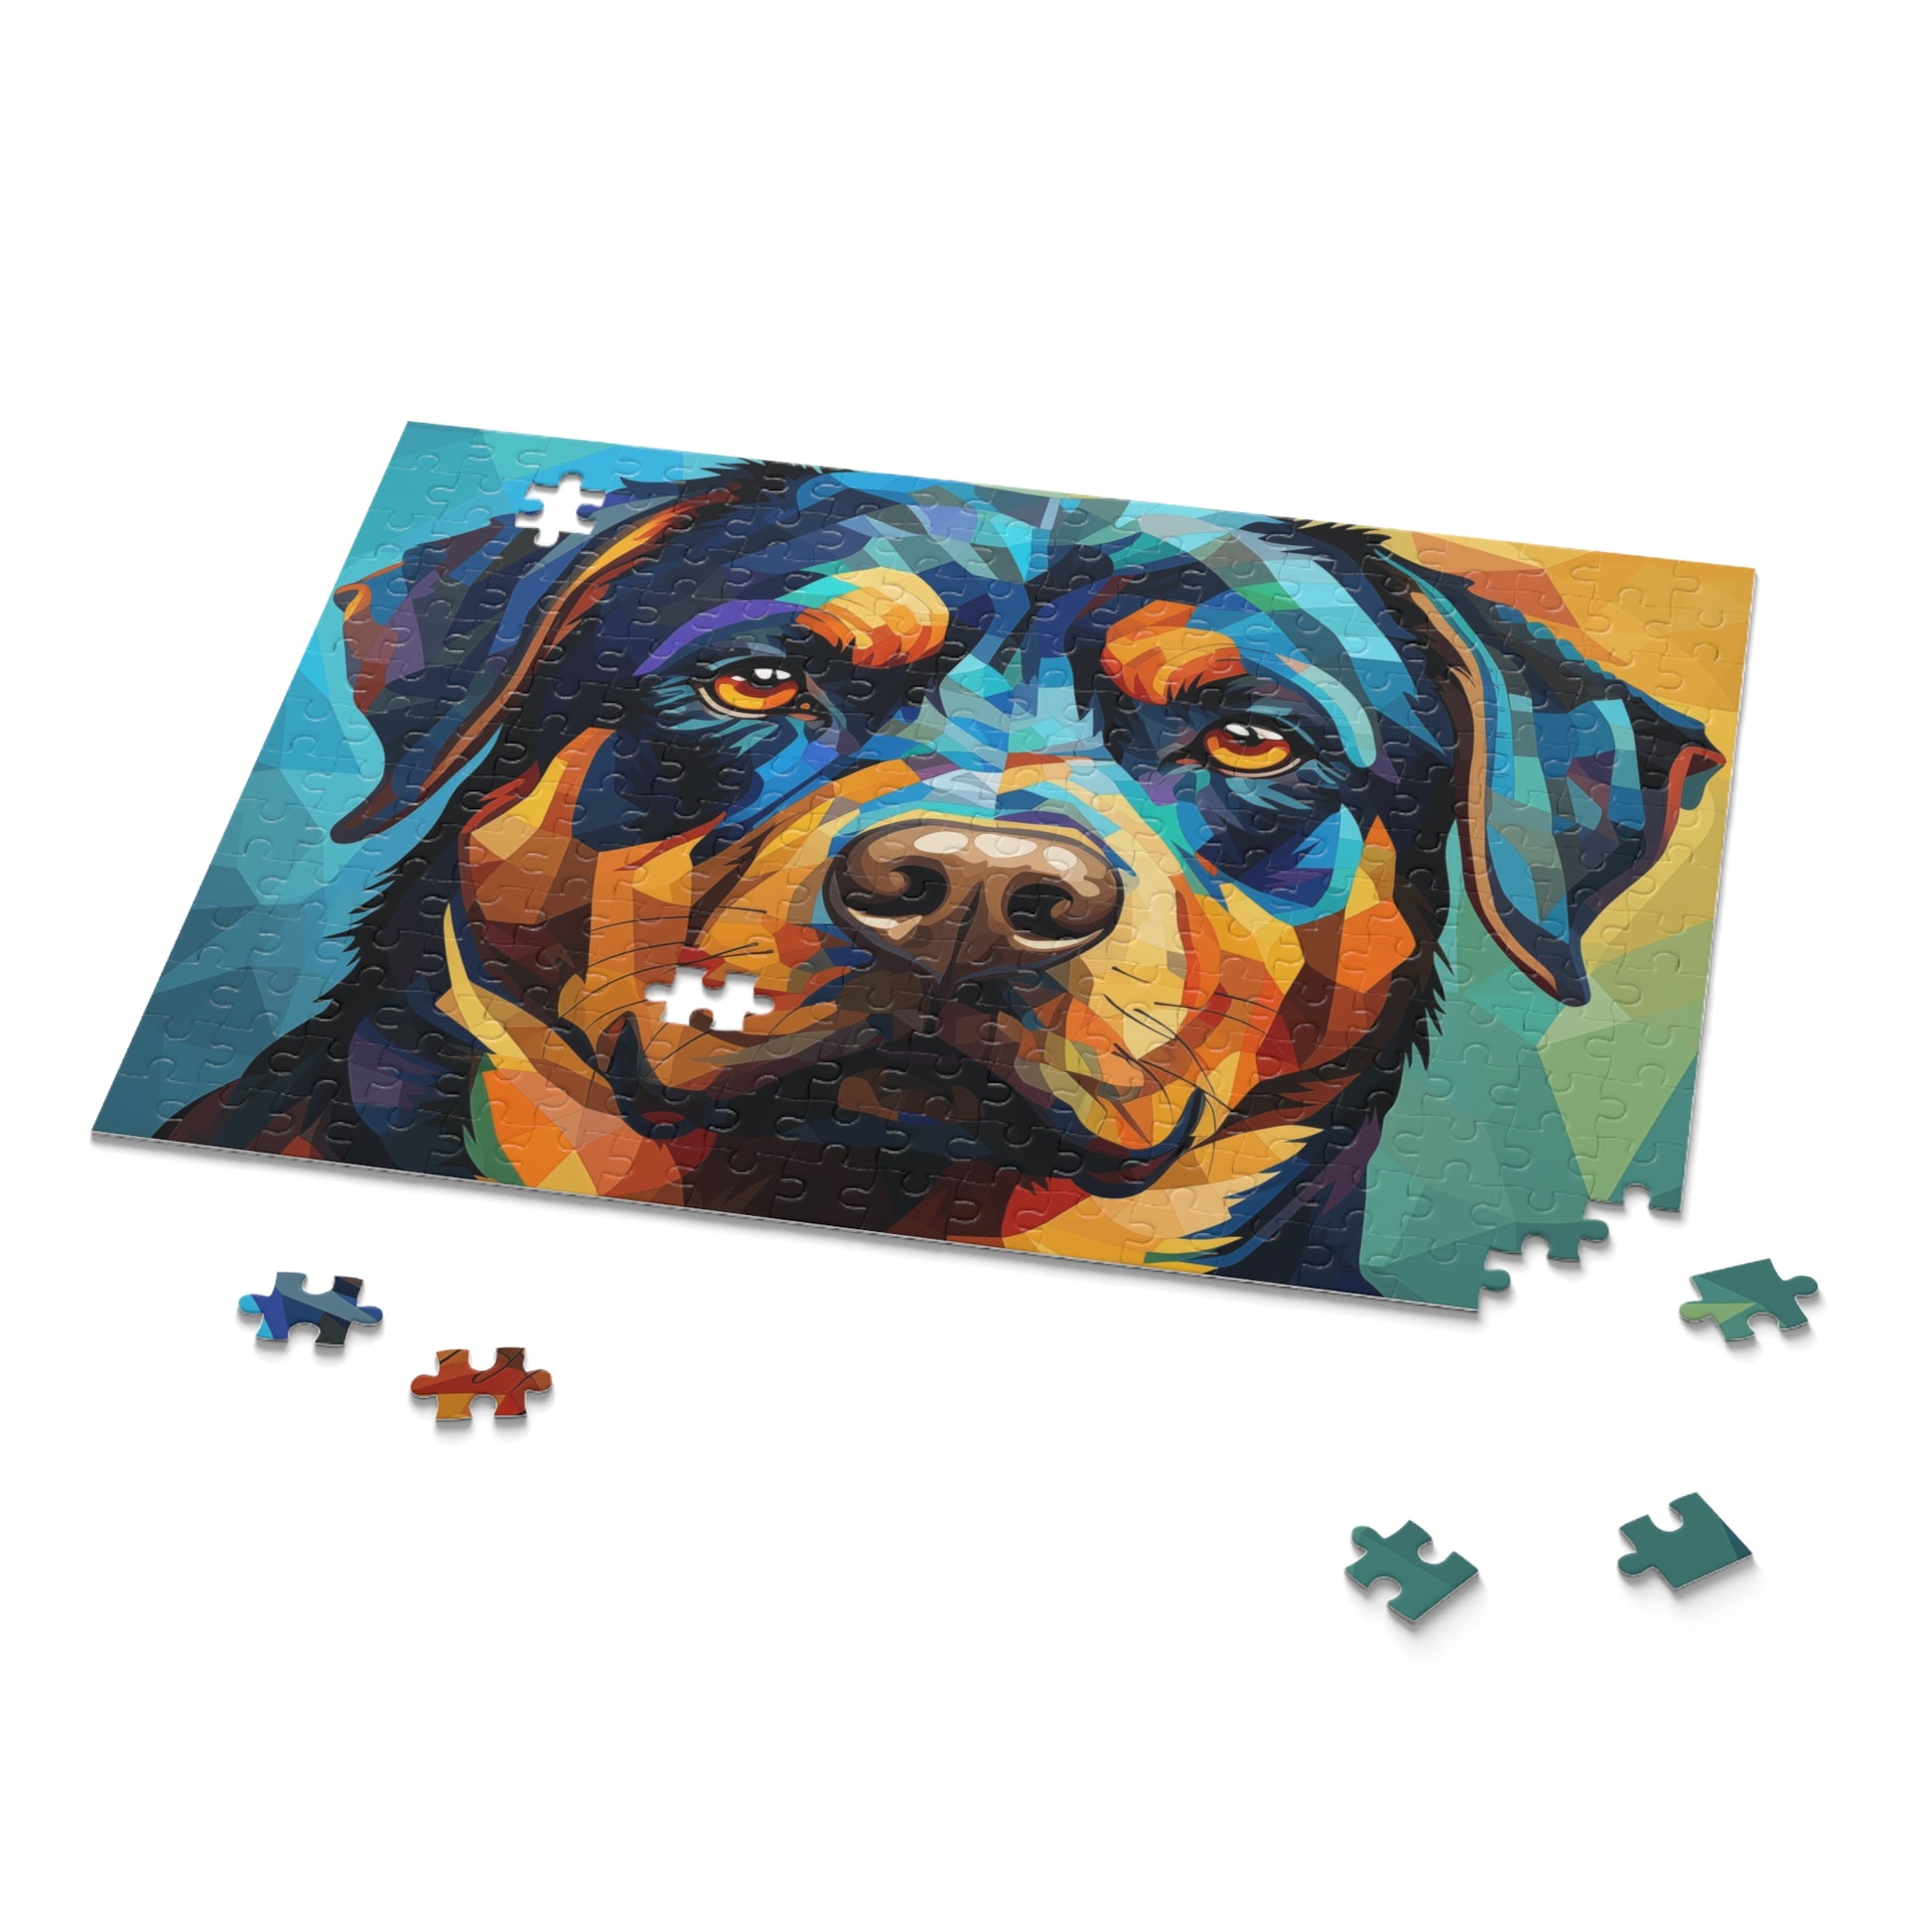 Watercolor Rottweiler Puzzle for Boys, Girls, Kids - Jigsaw Vibrant Oil Paint Dog Puzzle - Abstract Lover Gift - Rottweiler Trippy Puzzle Adult Birthday Business Jigsaw Puzzle Gift for Him Funny Humorous Indoor Outdoor Game Gift For Her Online-9